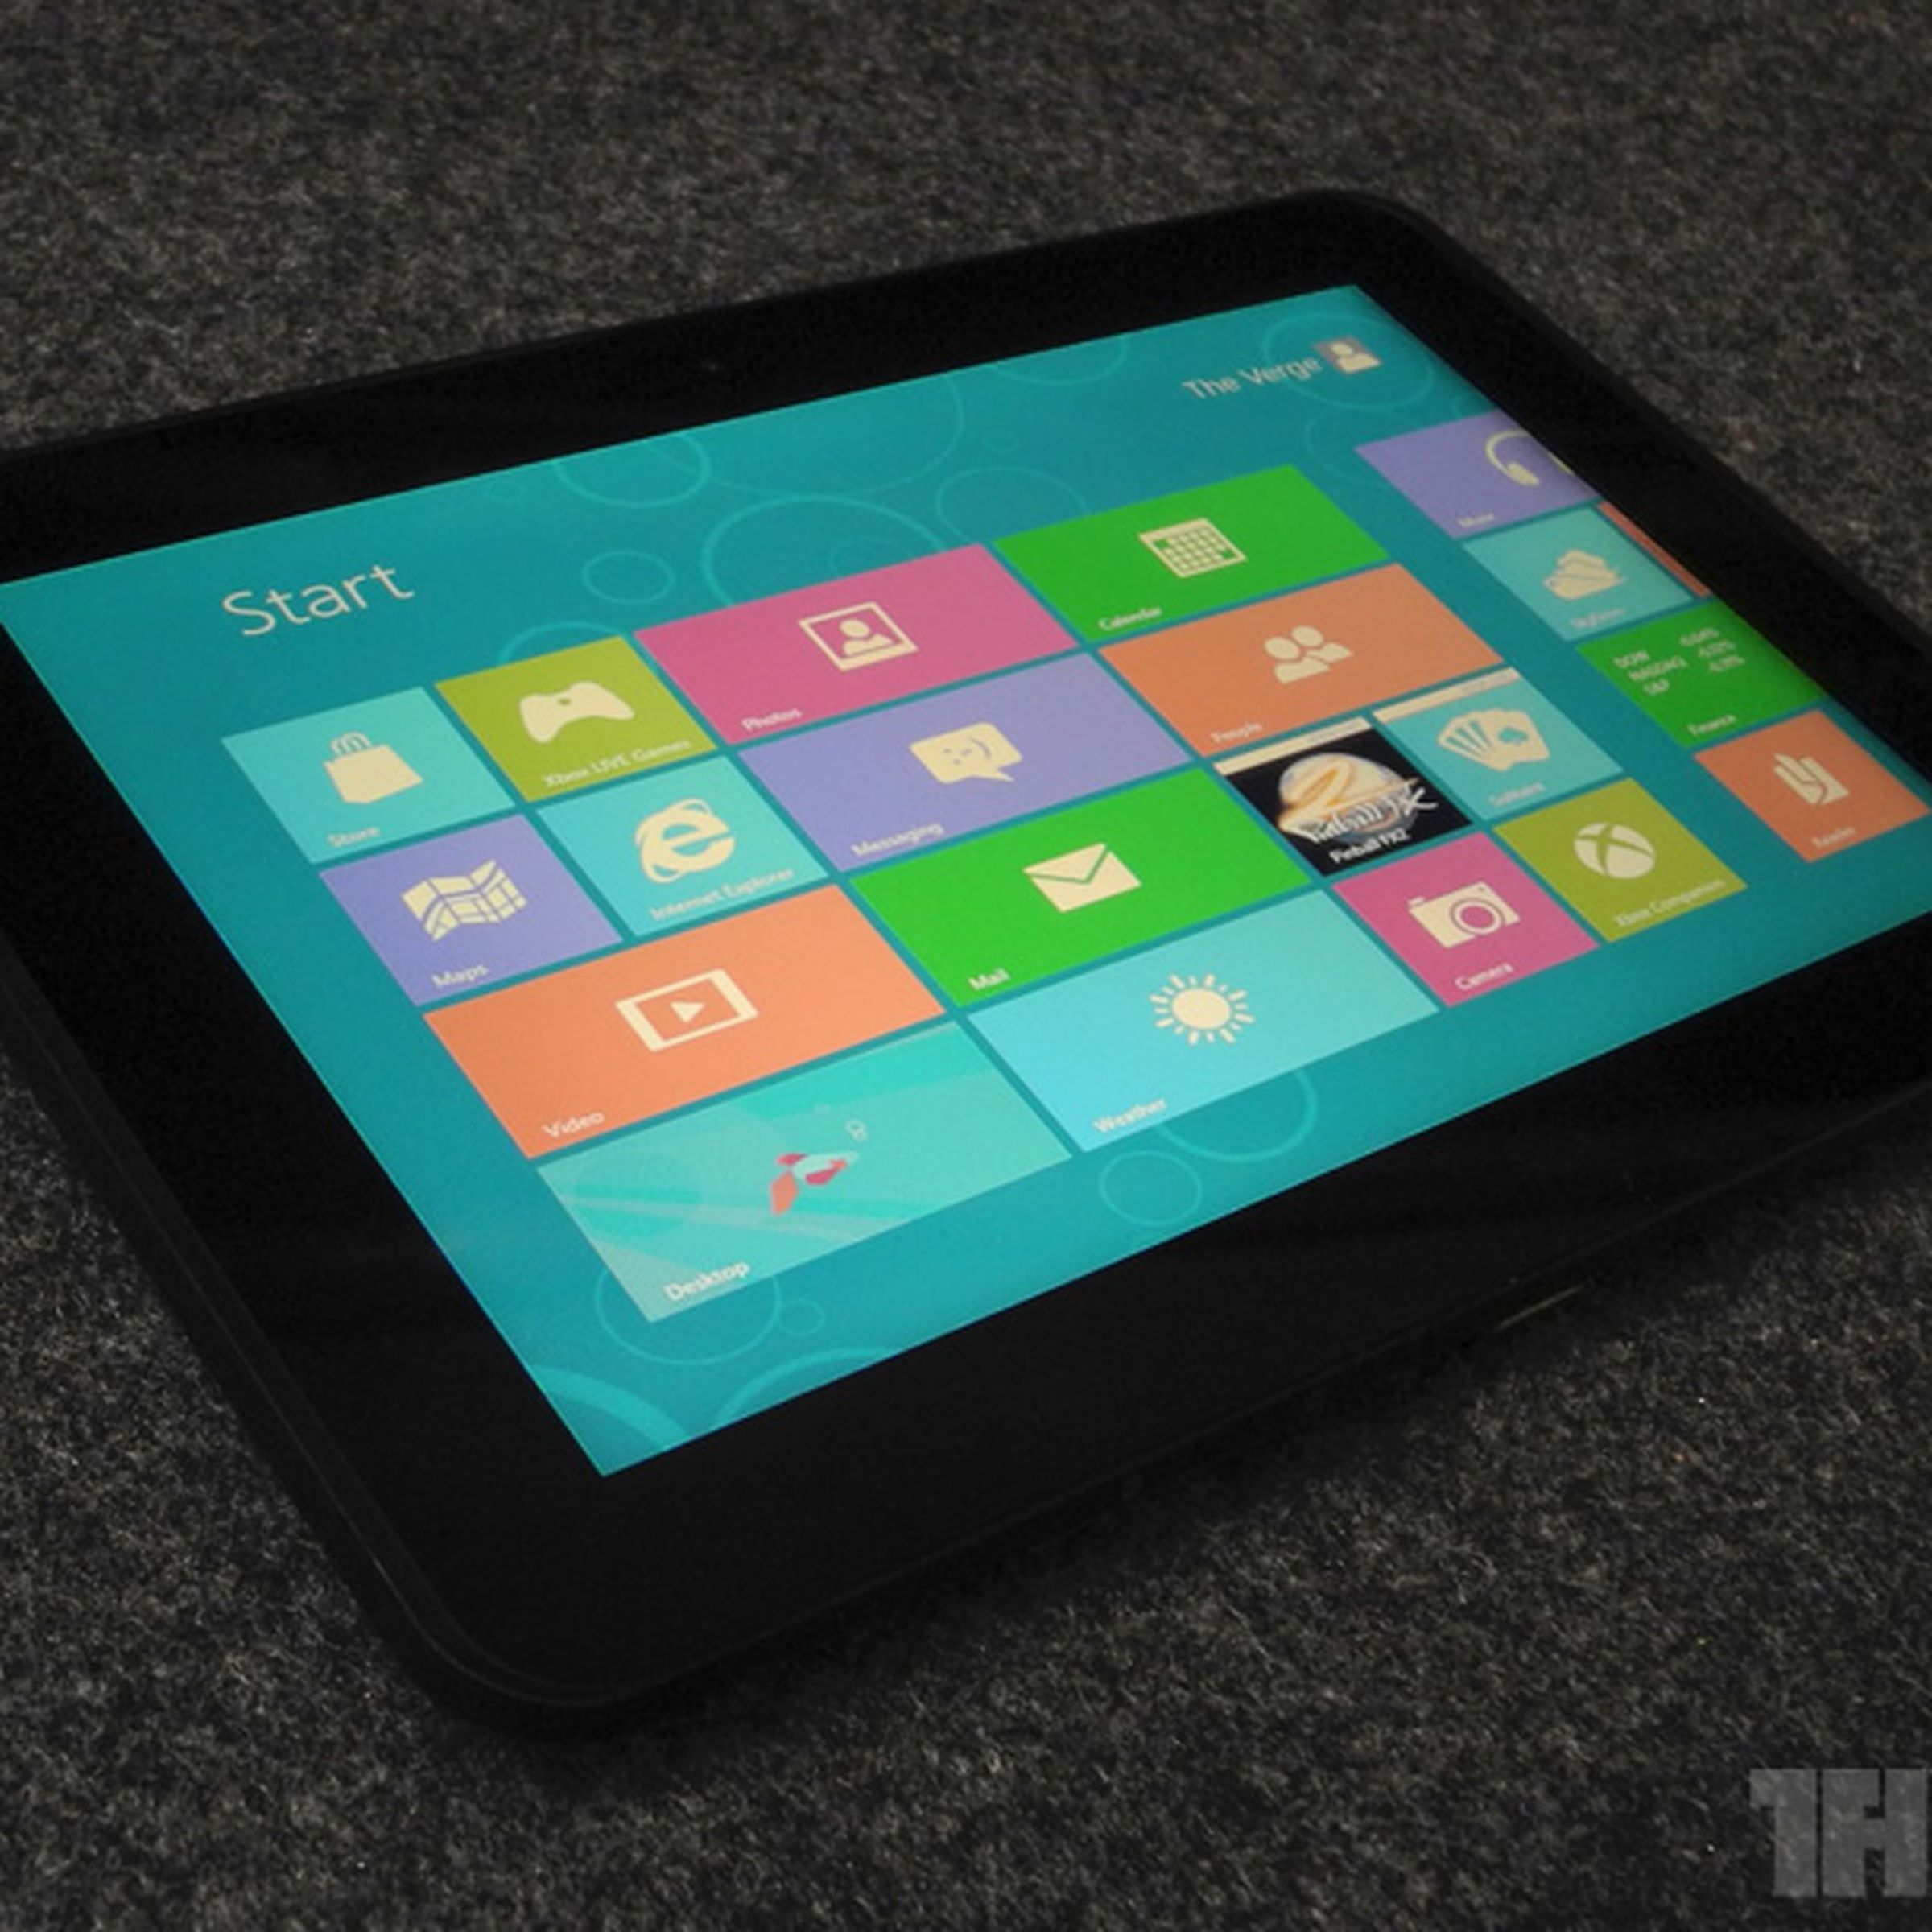 Windows 8 Consumer Preview on ViewSonic tablet